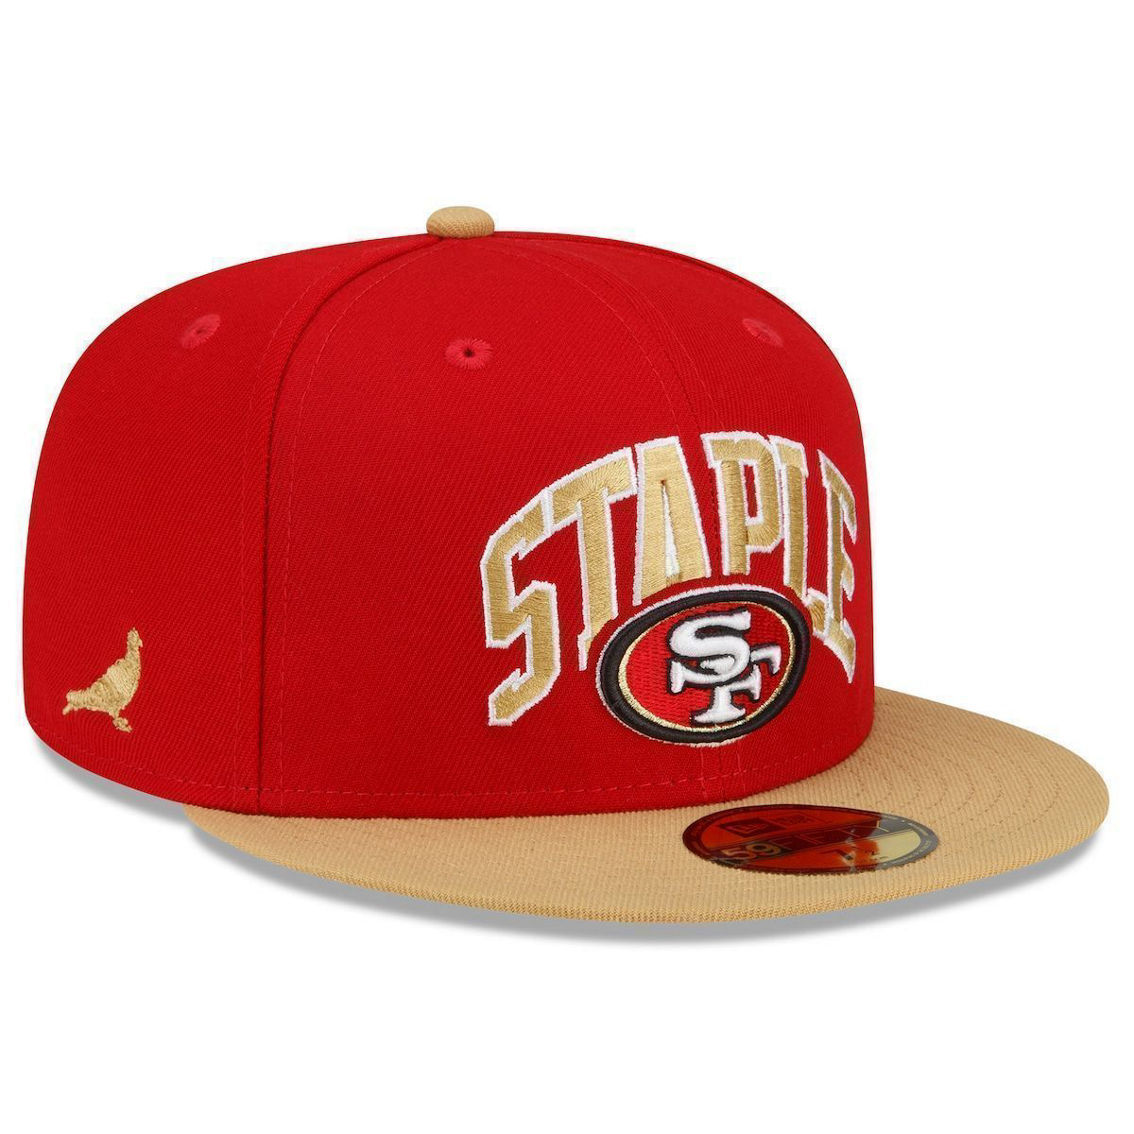 New Era x Staple Men's Scarlet/Gold San Francisco 49ers NFL x Collection 59FIFTY Fitted Hat - Image 2 of 4